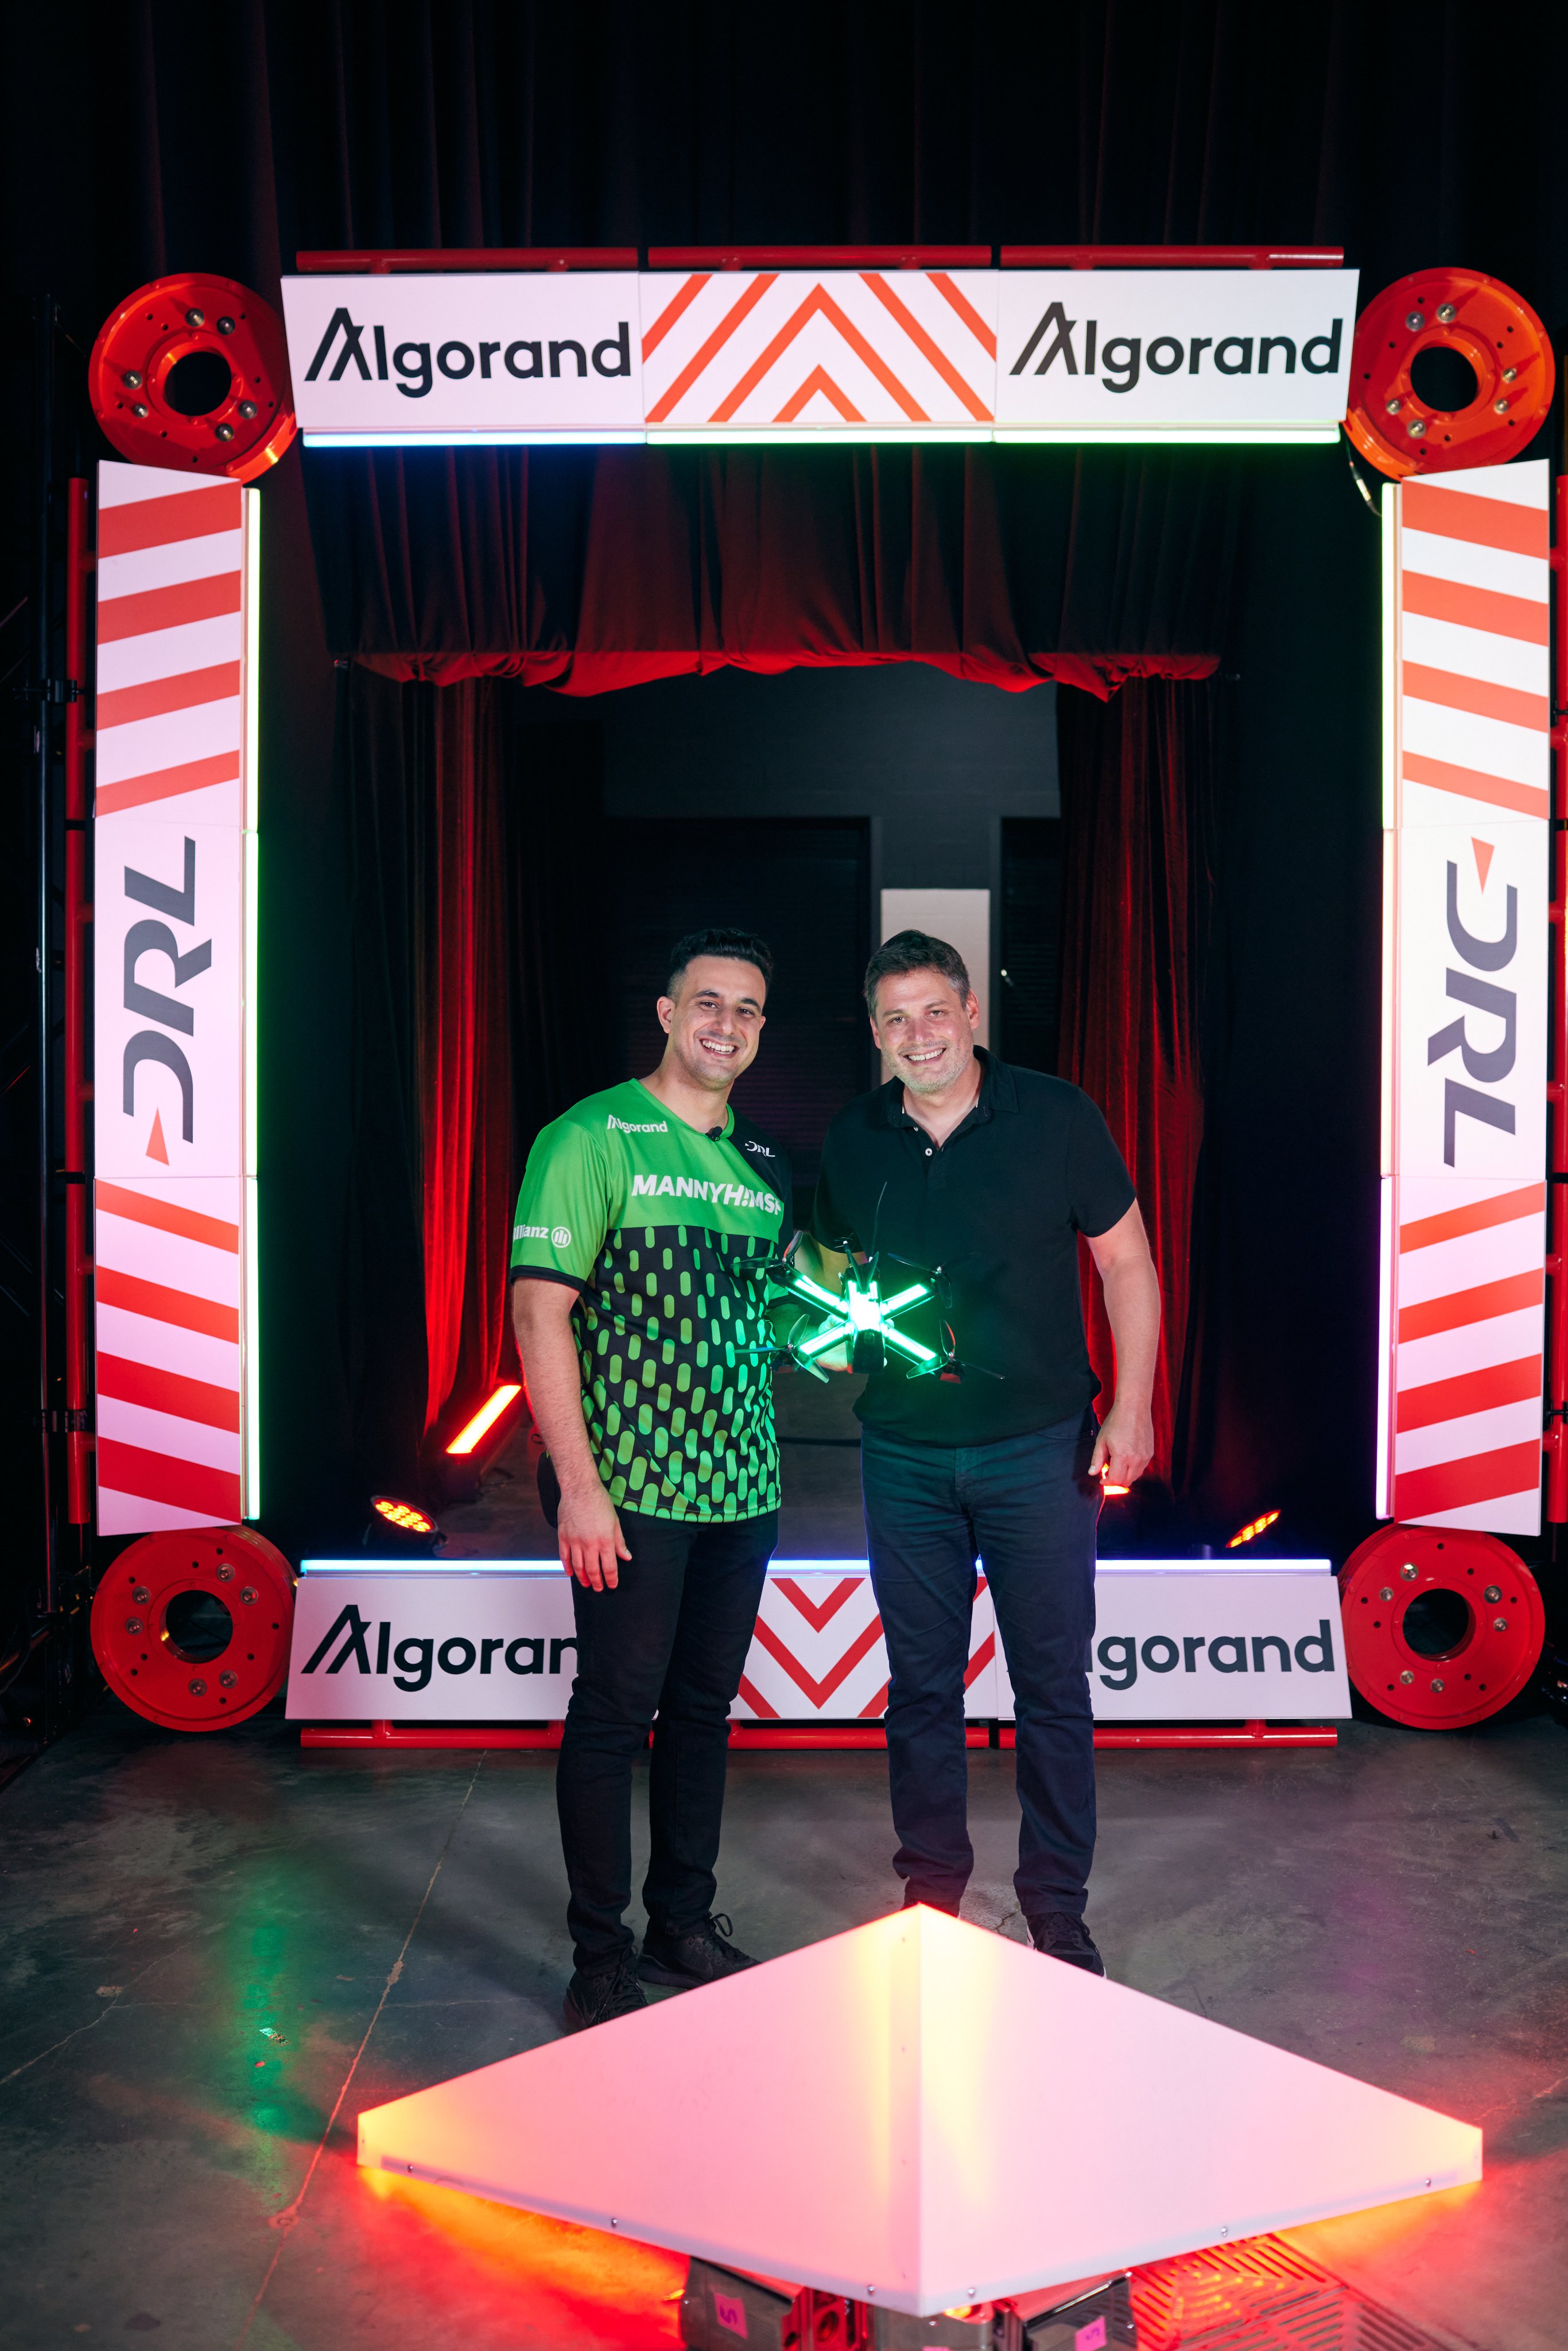 Drone racer Manny with Algorand CEO